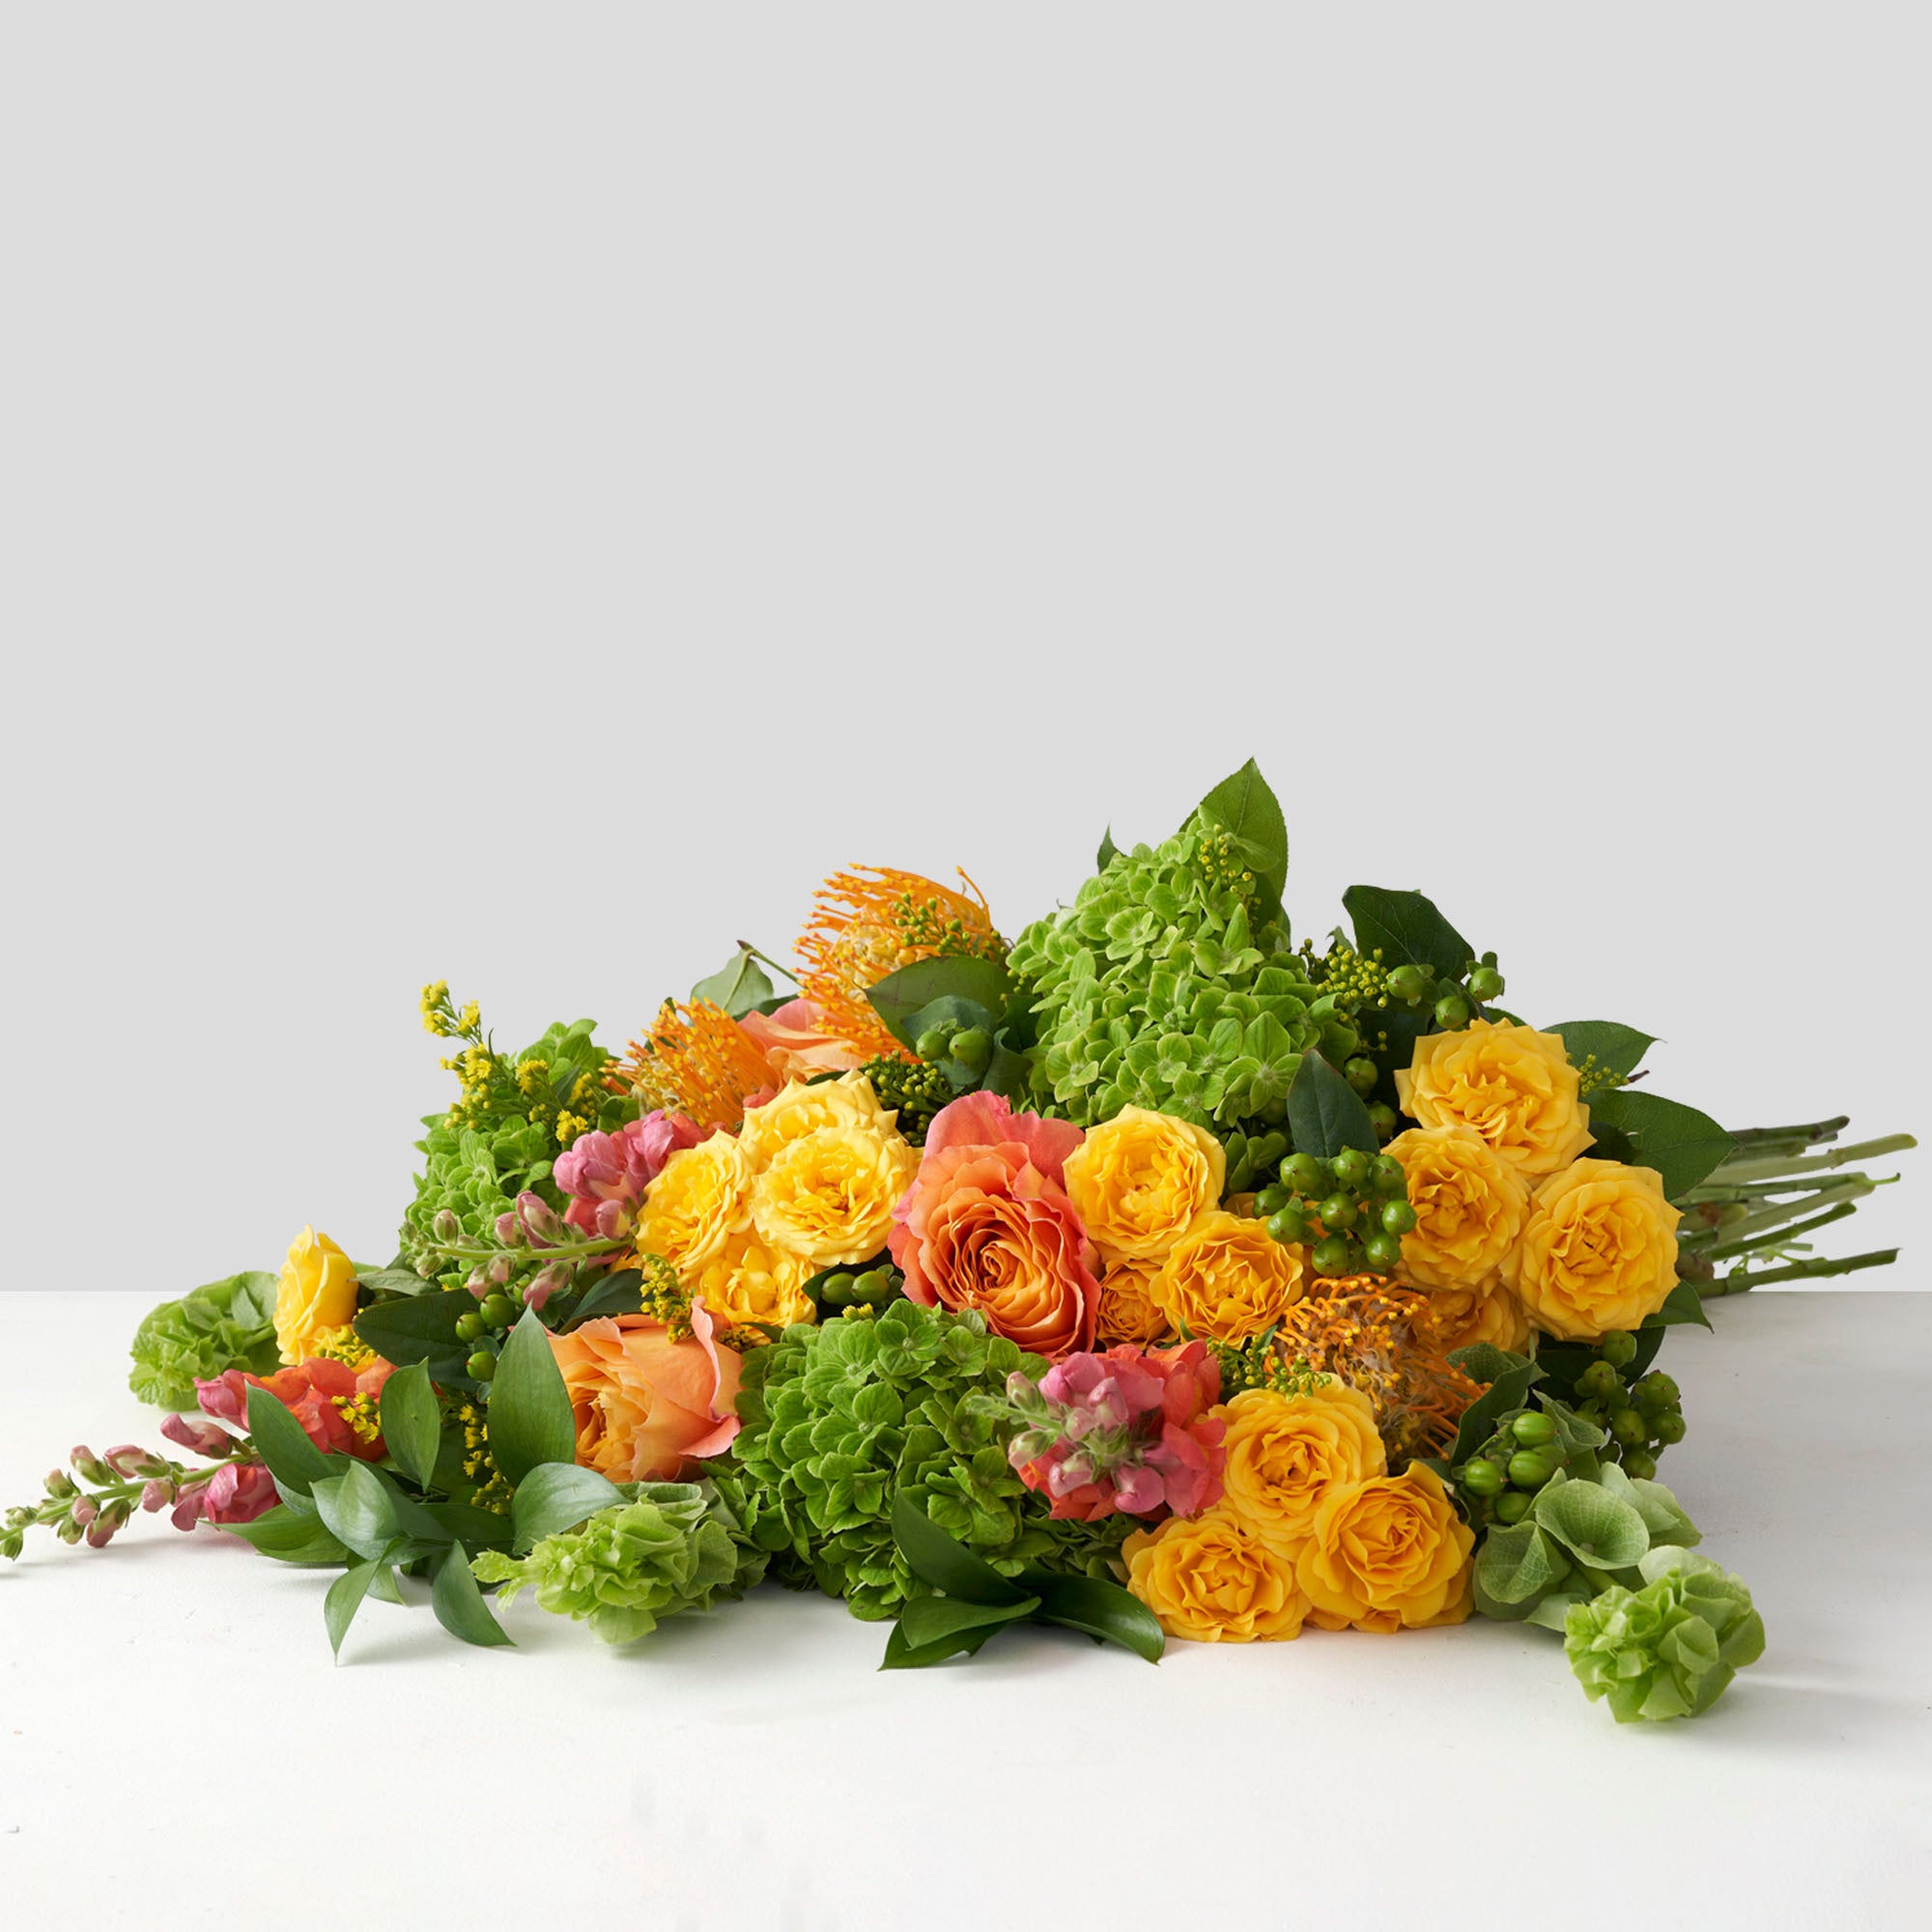 Large bouquet of yellow, lime green, and orange flowers on white background. 